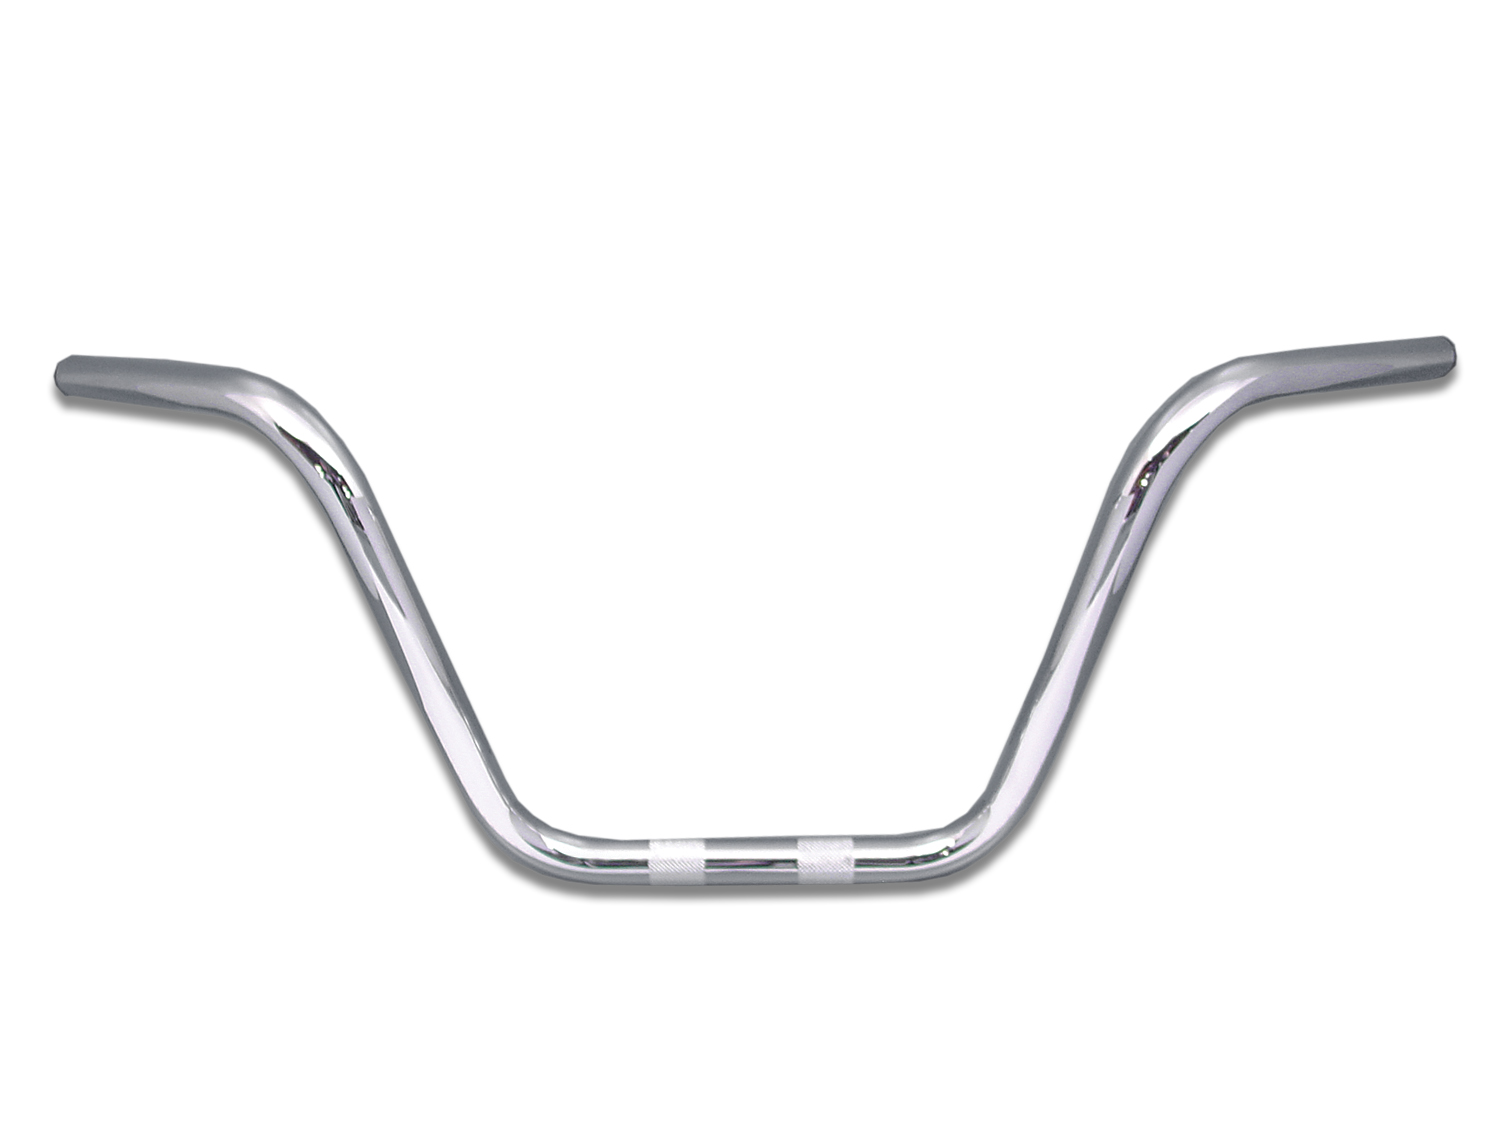 11 Replica Handlebar with Indents